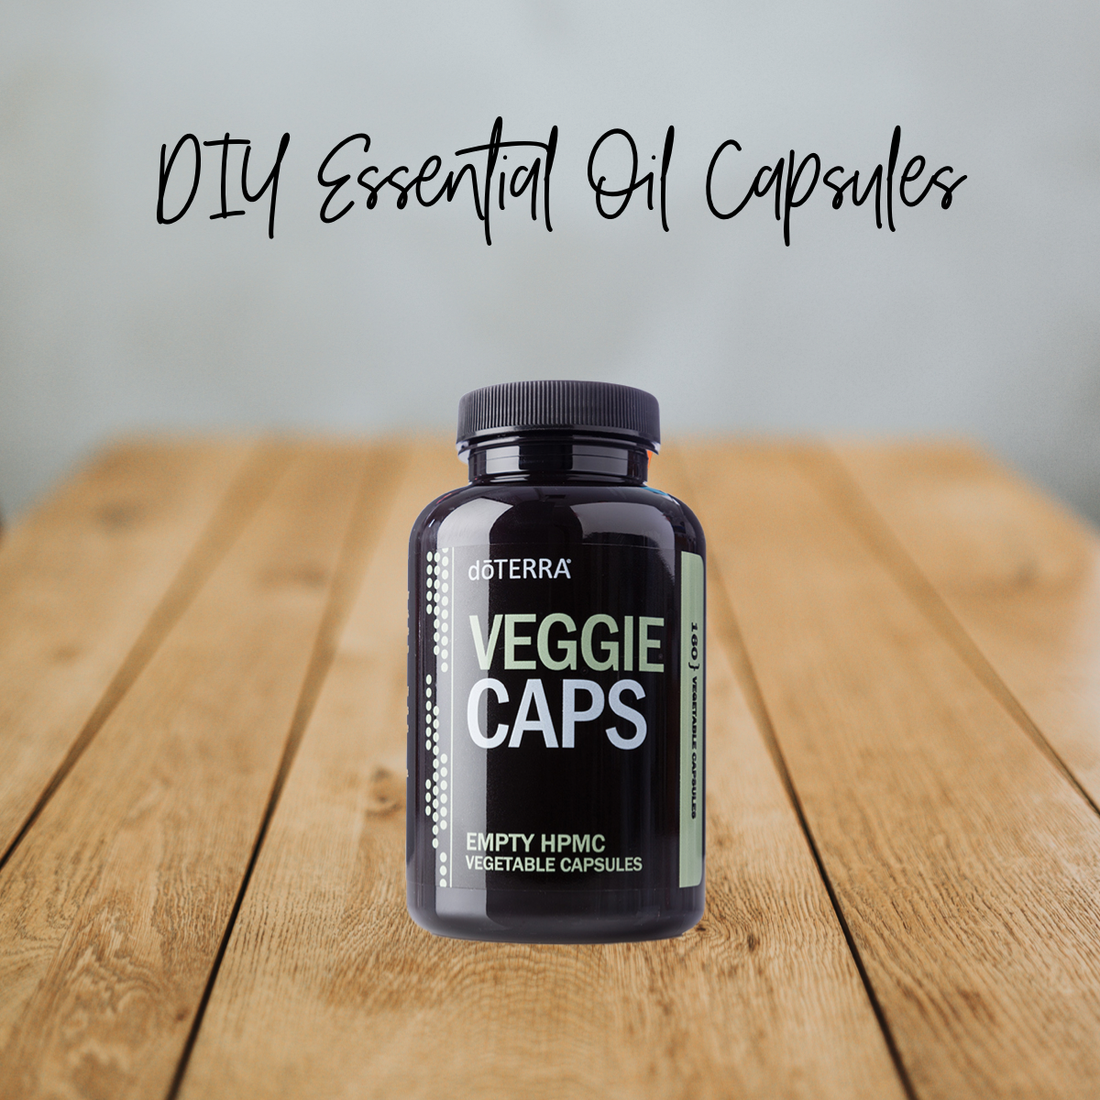 DIY 3 New Essential Oil Capsules To Try